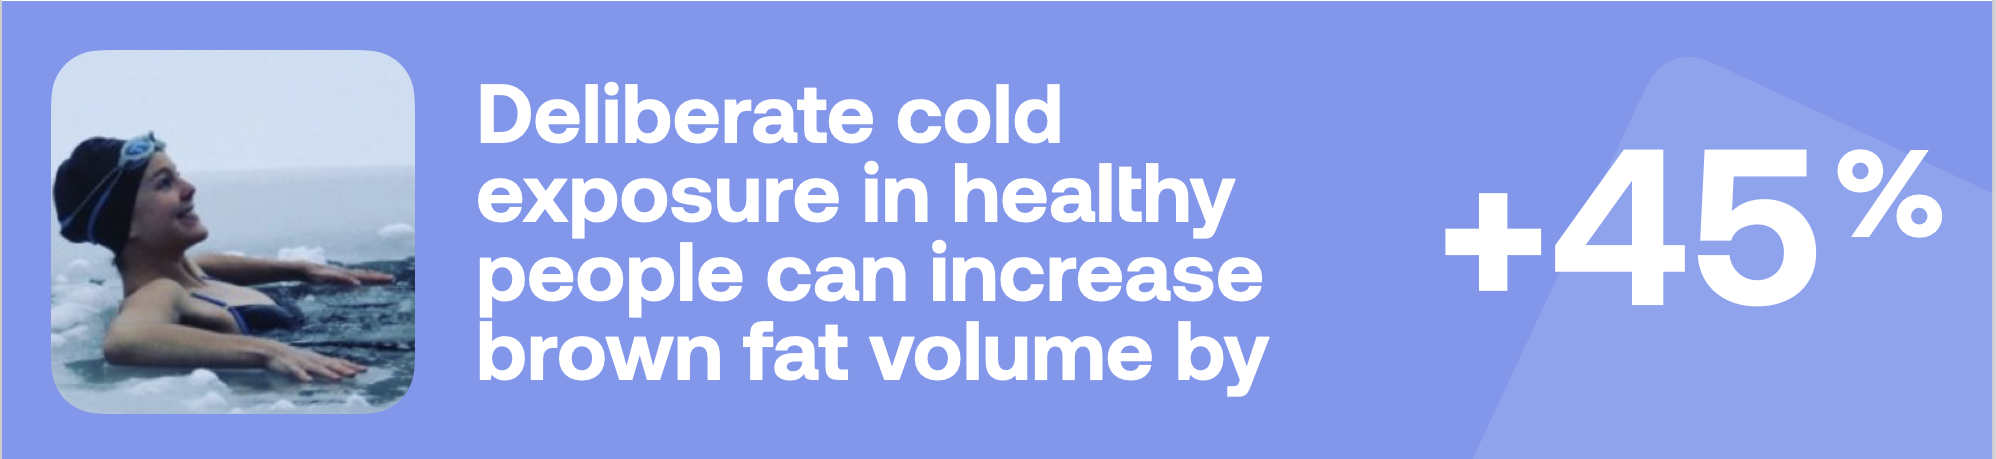 Deliberate cold exposure in healthy people can increase brown fat volume by +45%